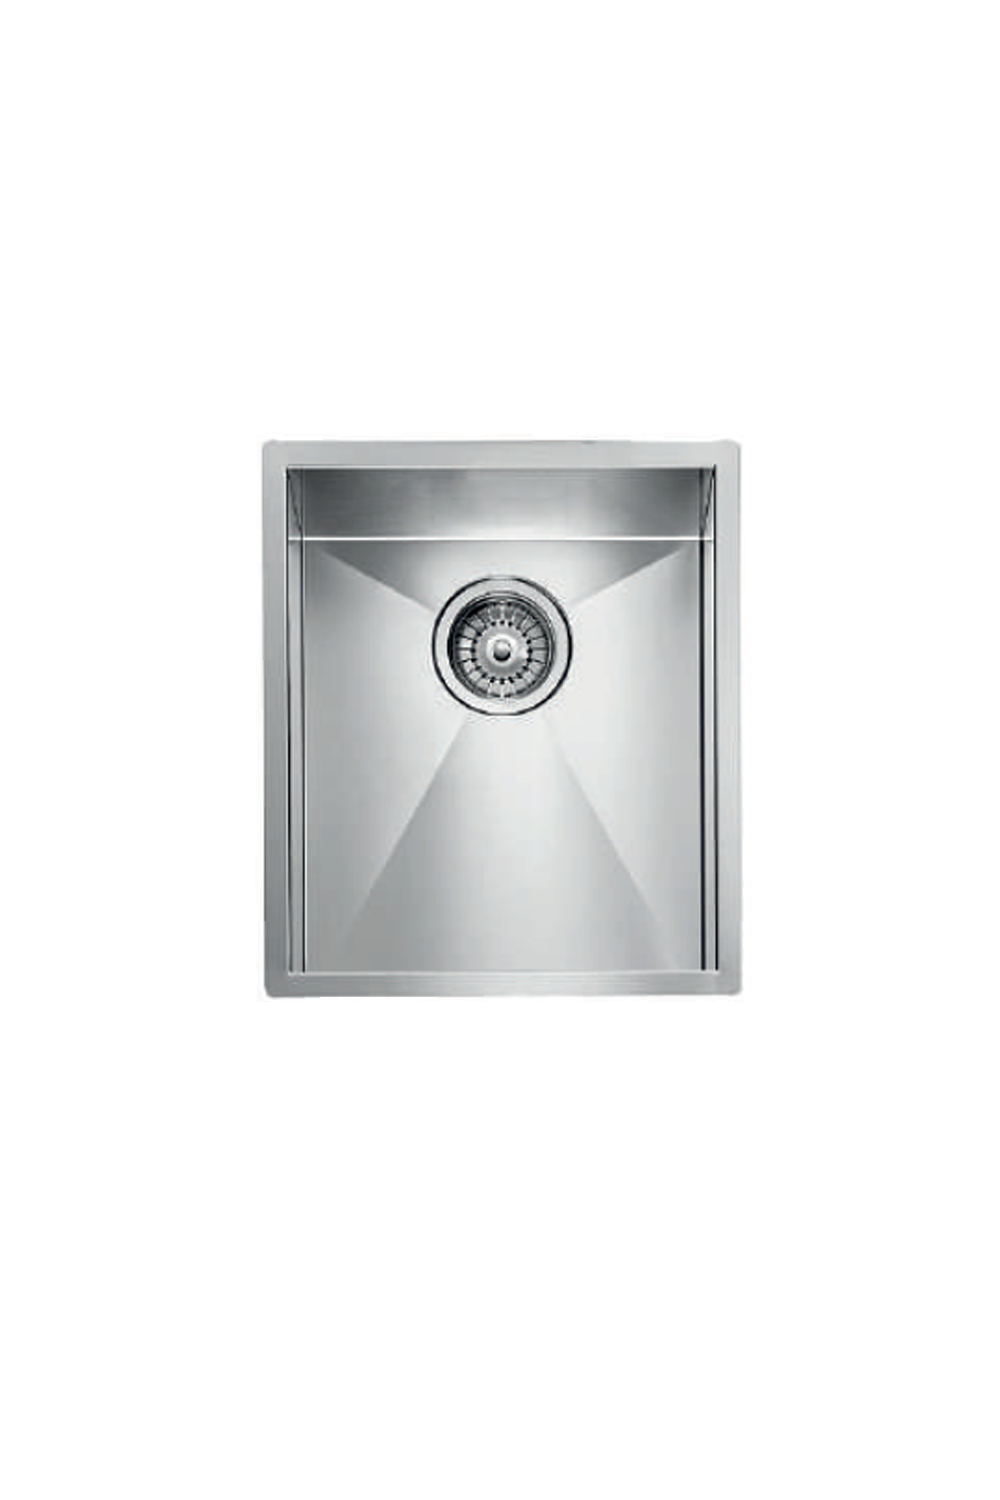 LUISINA 340mm R0-Corner Square Stainless Steel Sink 意大利製造直角方形不銹鋼星盆 | Made in Italy |